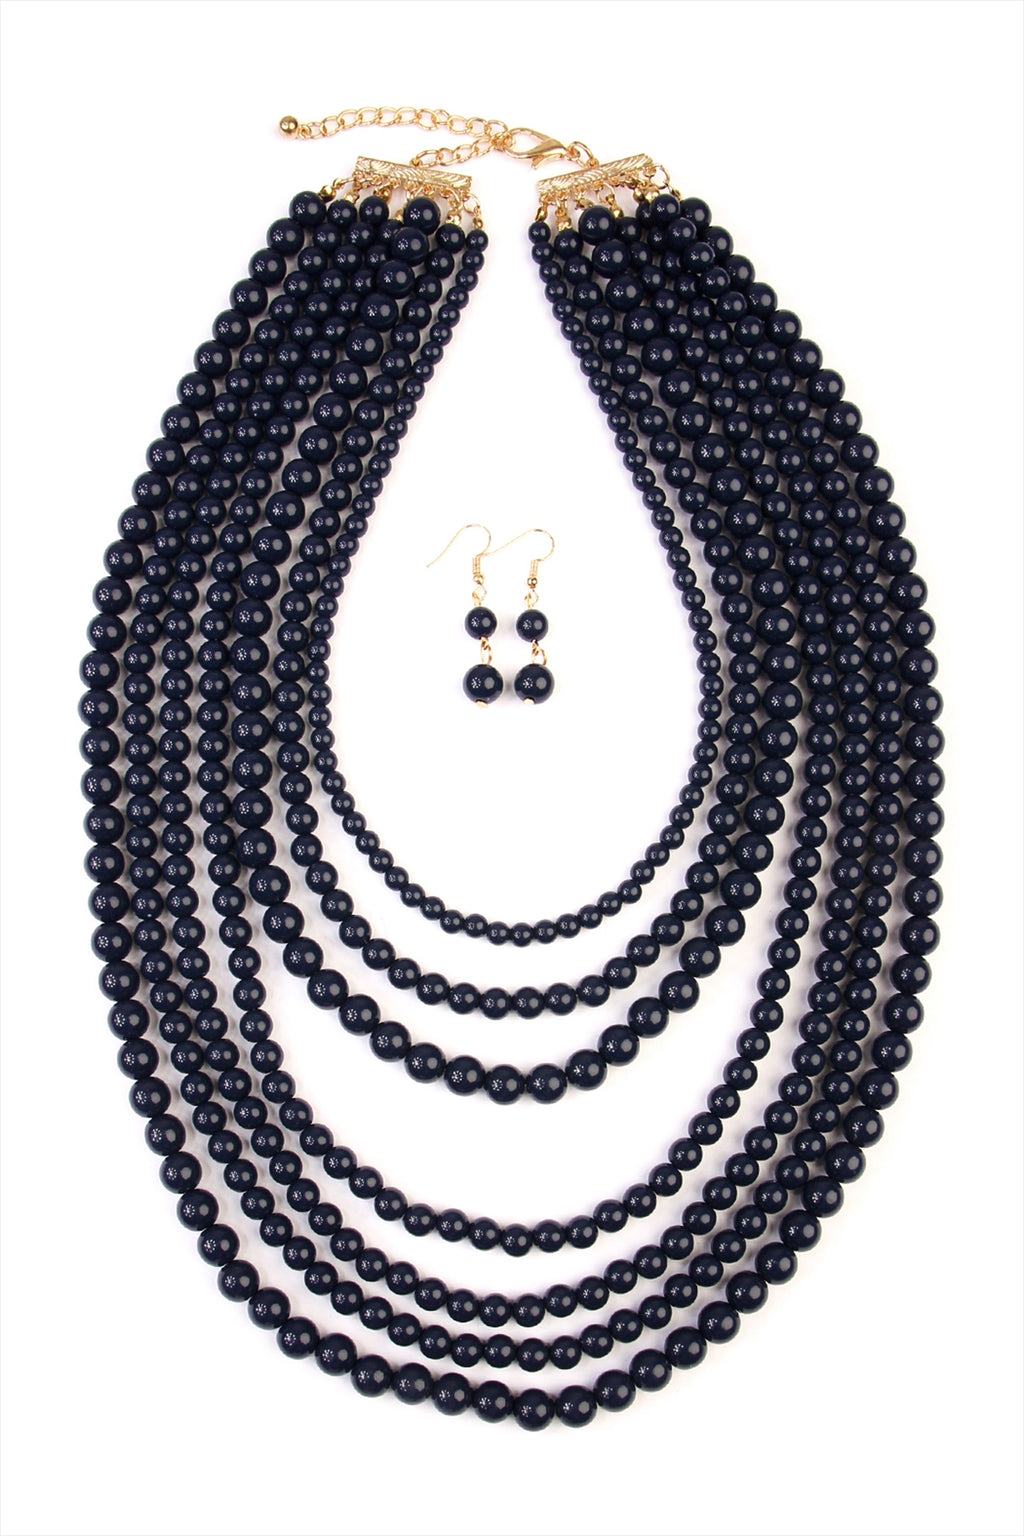 Multilayer Acrylic Navy Necklace and Earring Set - Pack of 6